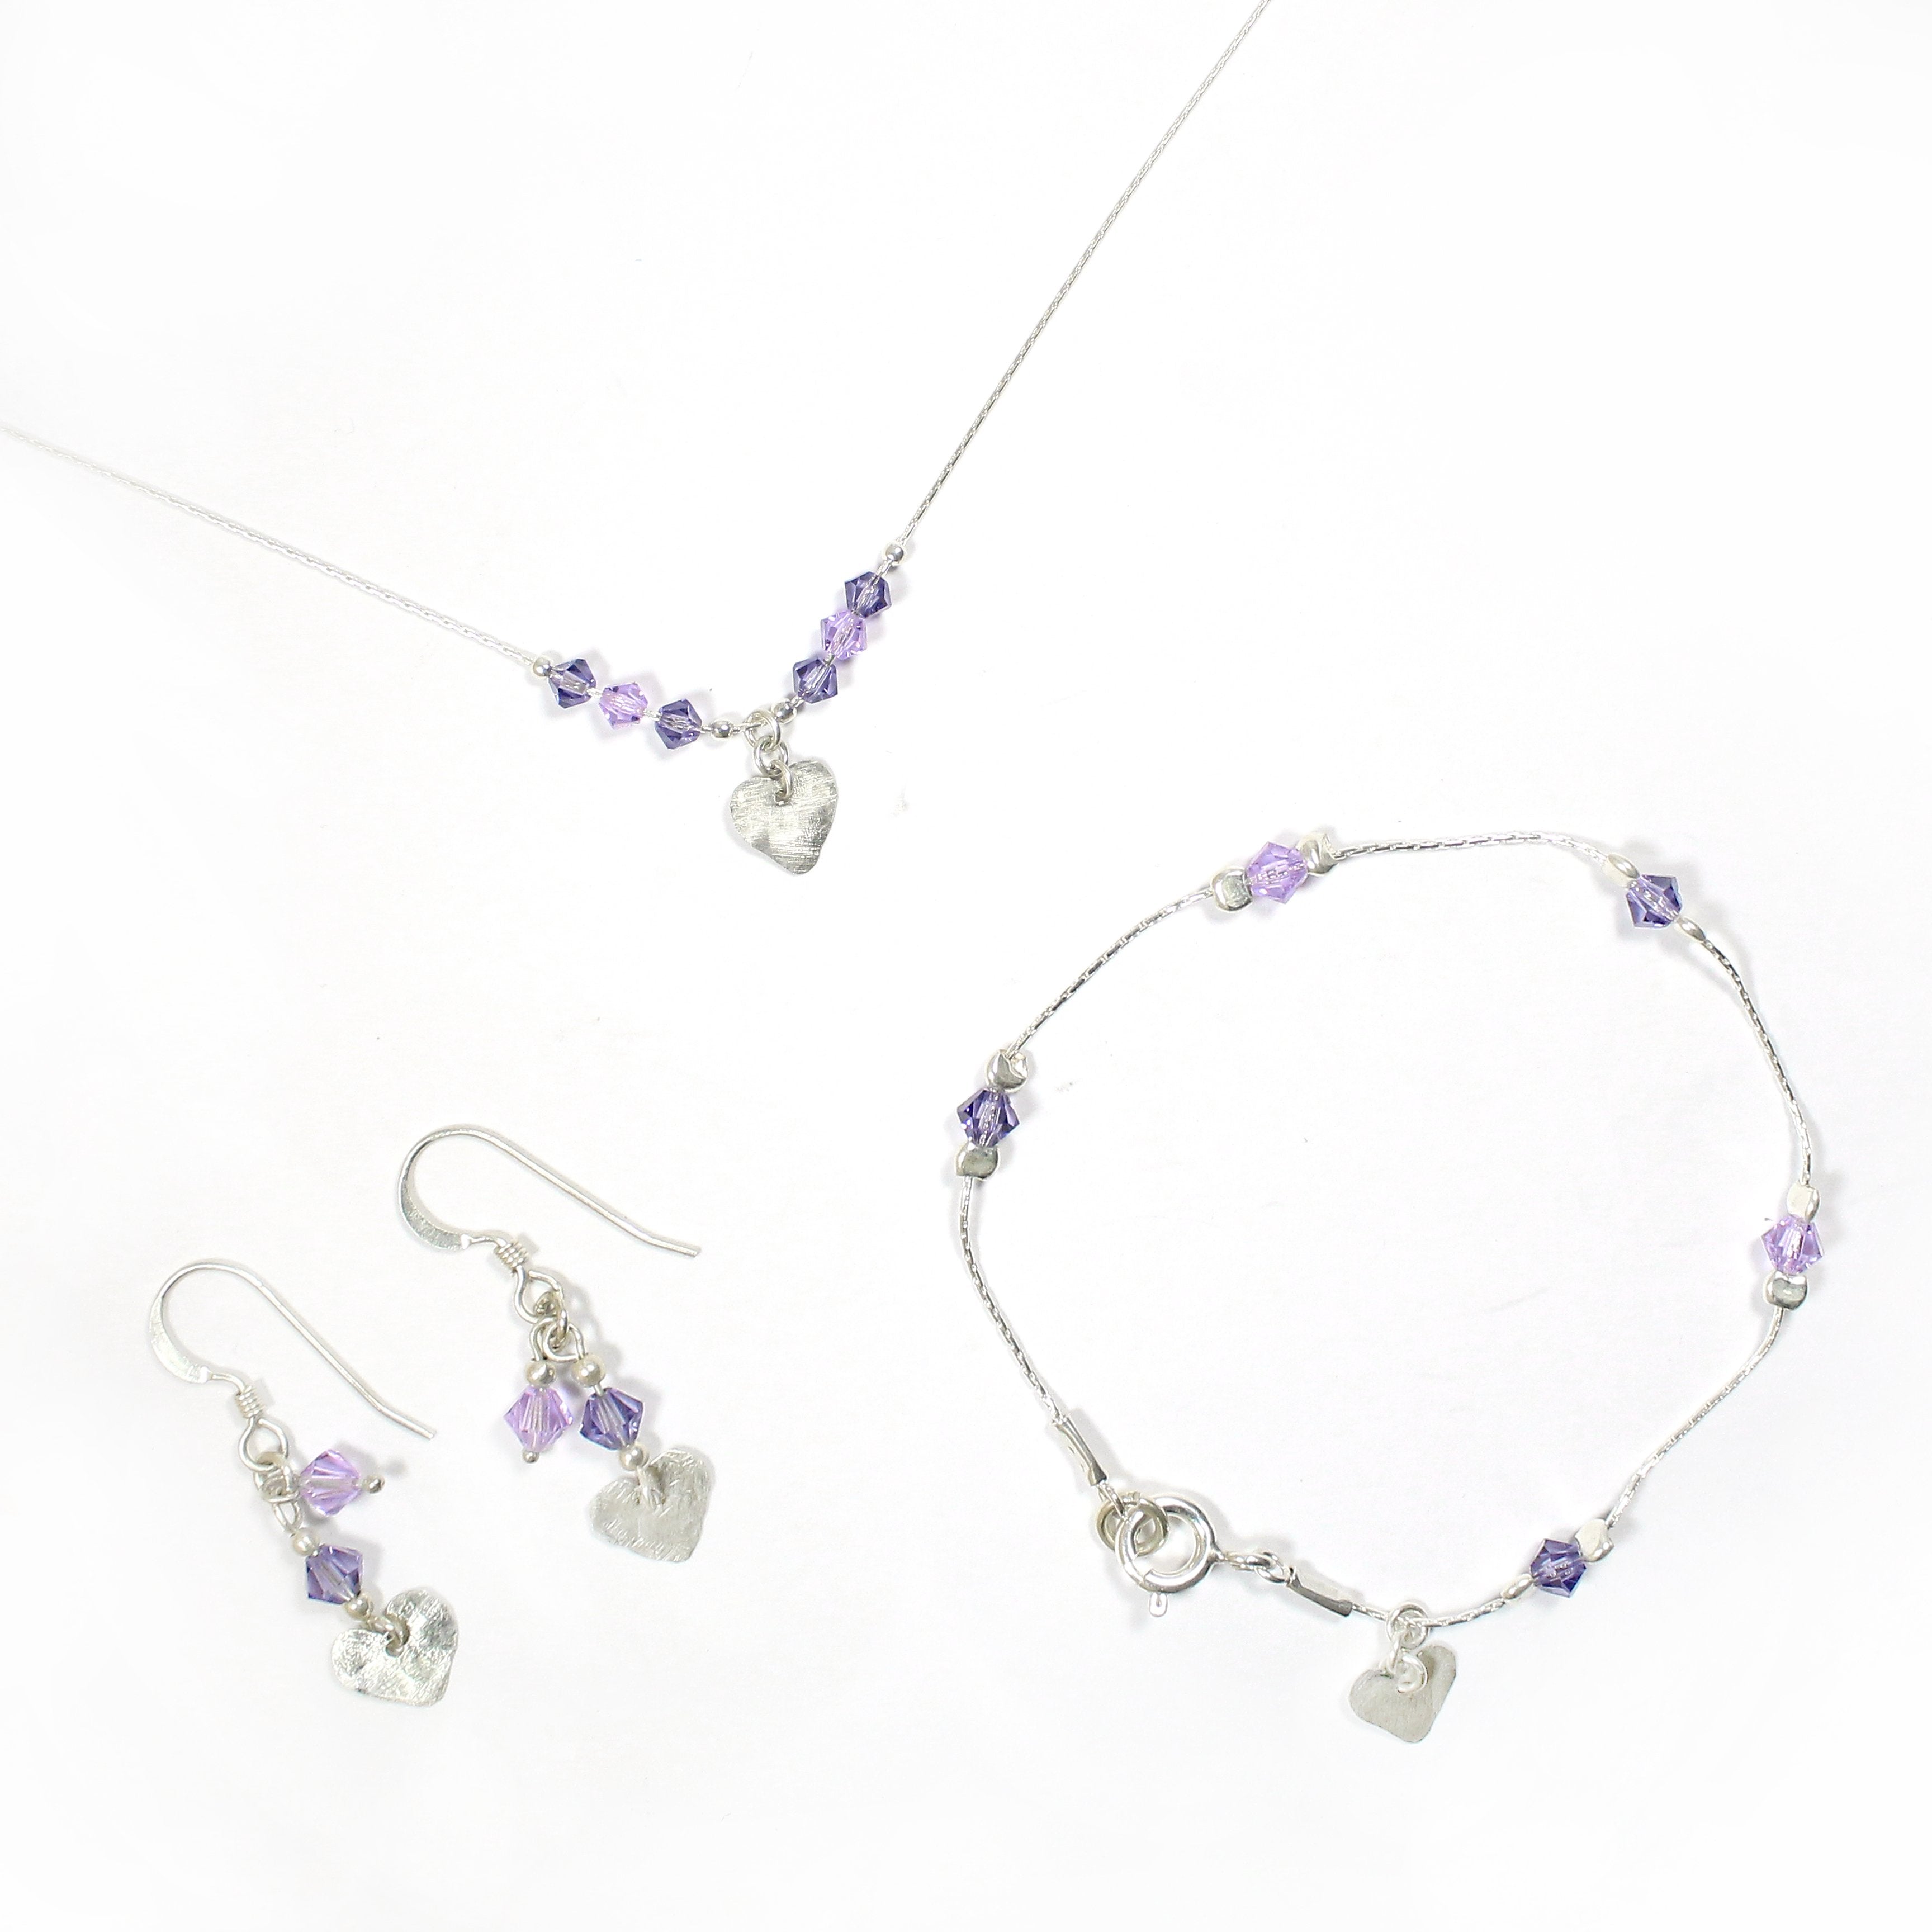 Swarovski and Silver Heart Jewelry Set - Shulamit Kanter Official Store